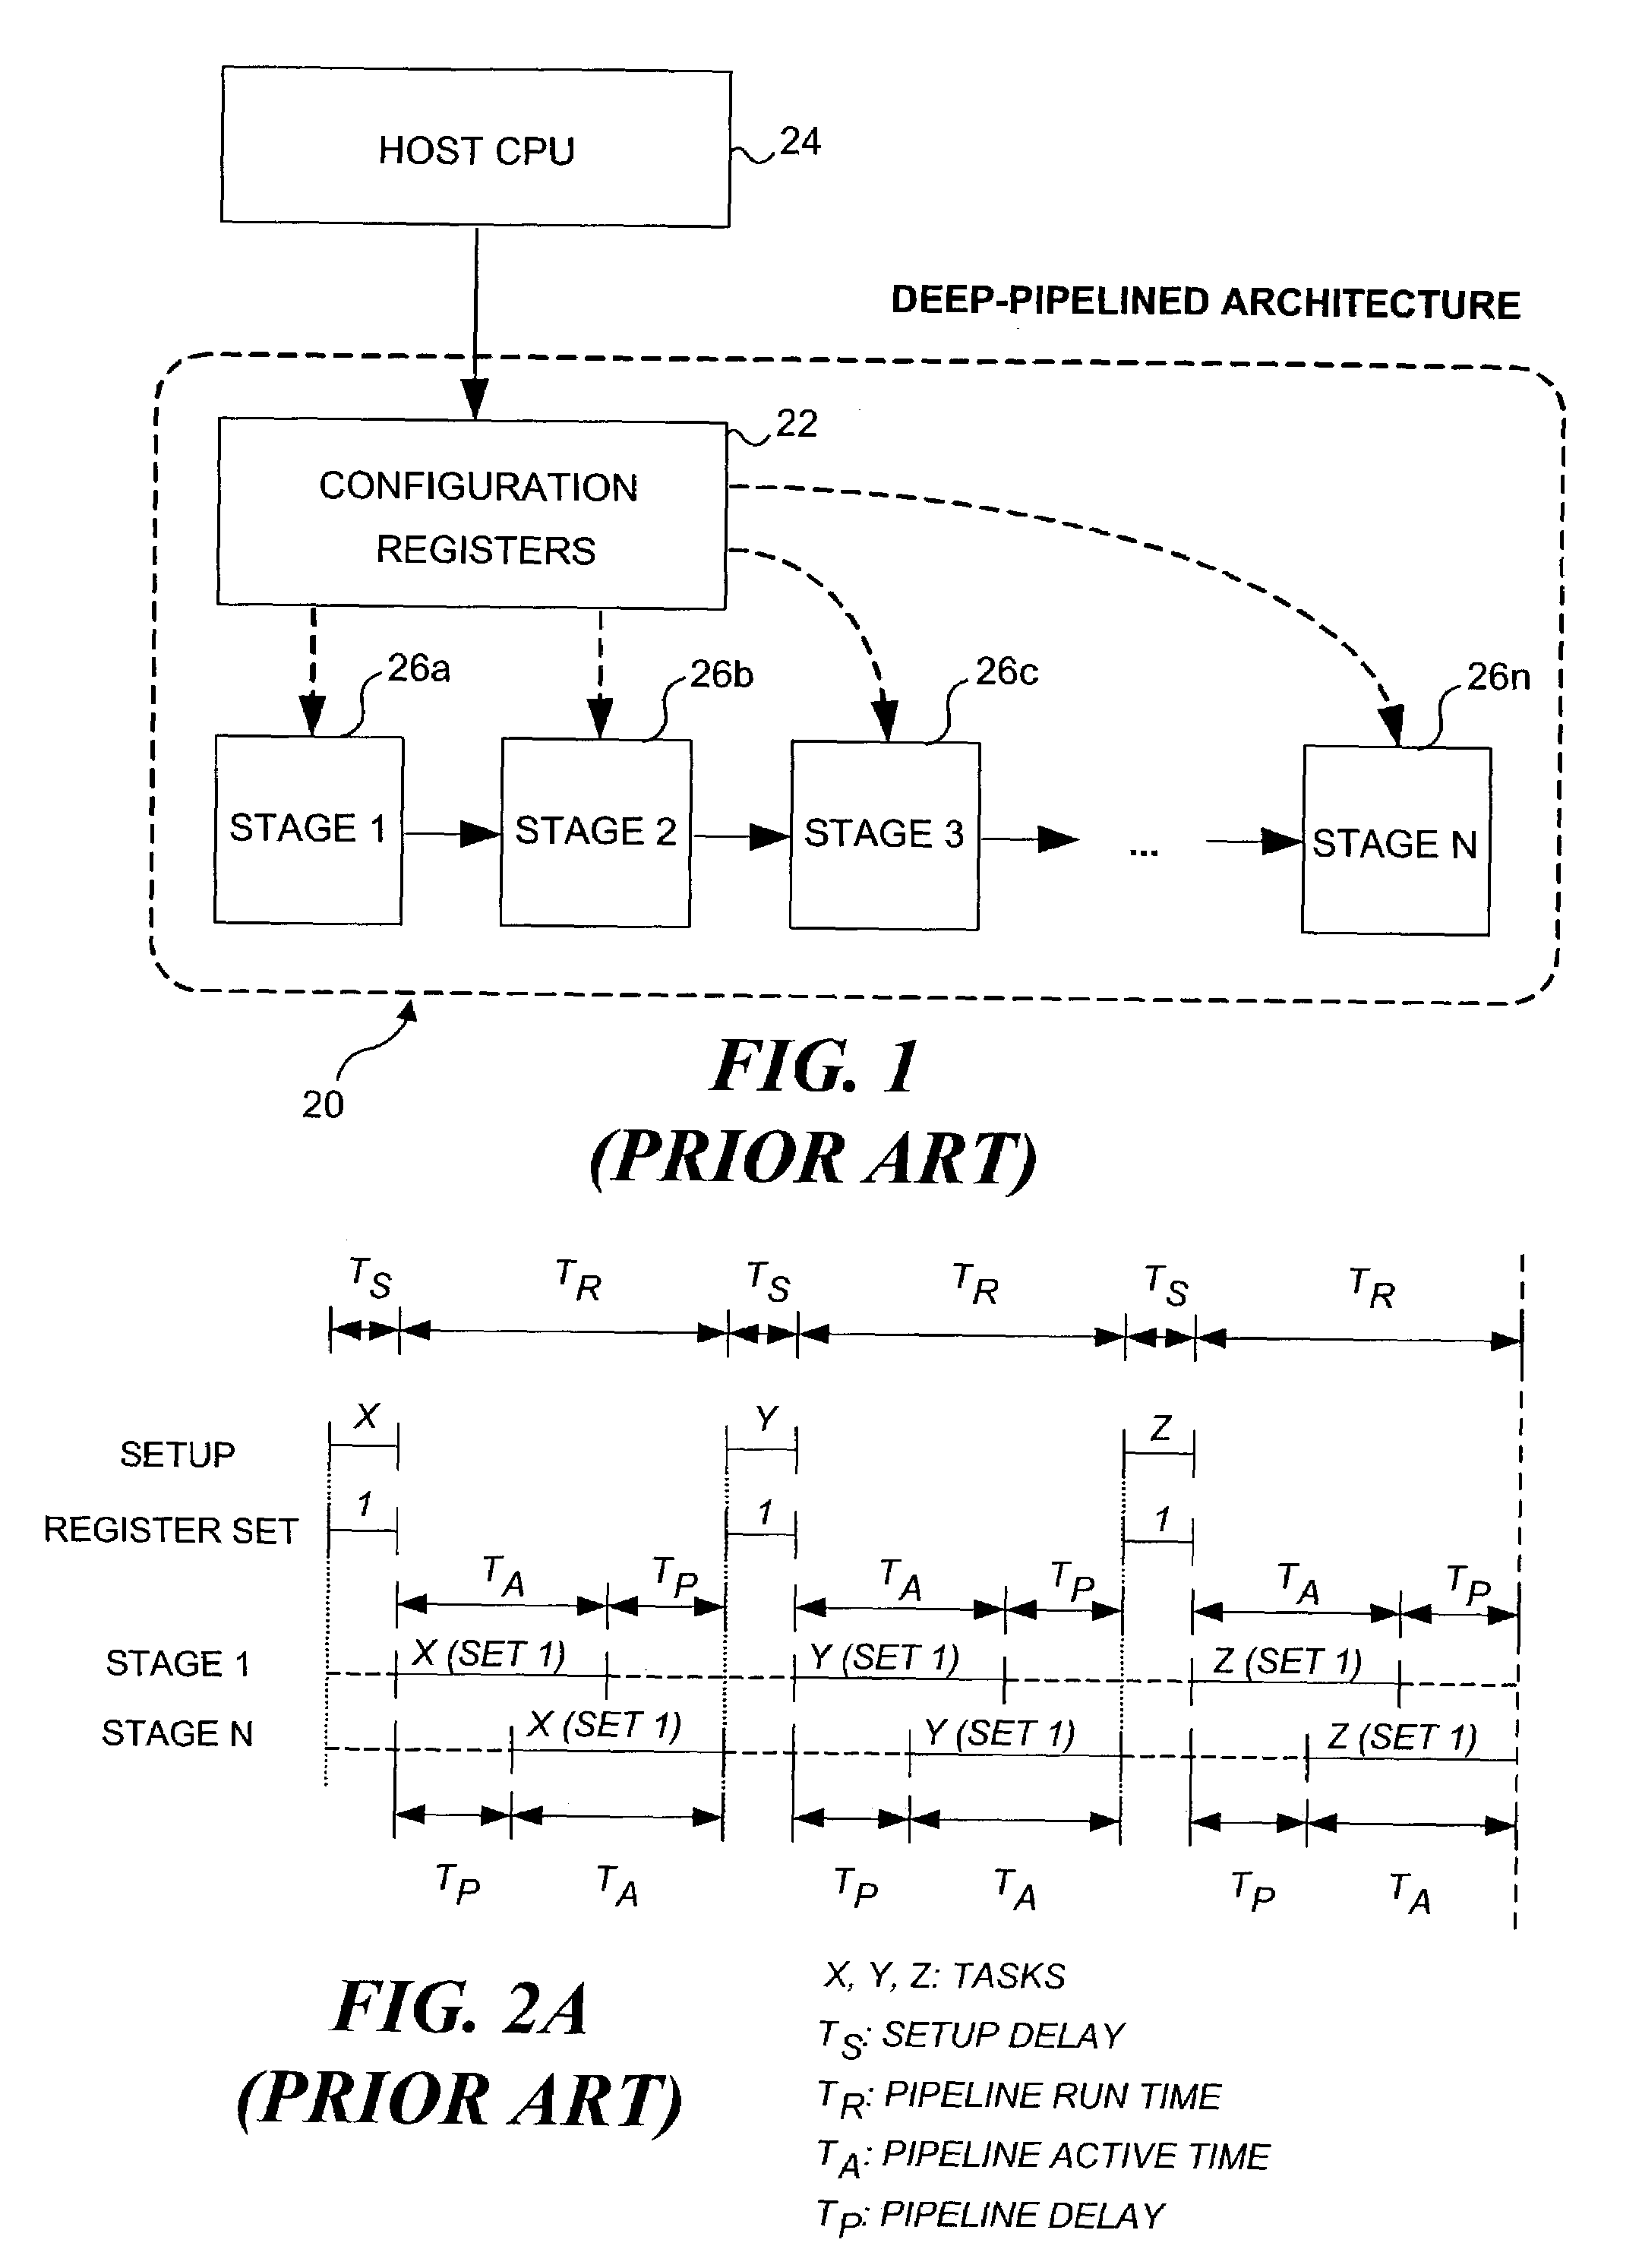 Processor employing loadable configuration parameters to reduce or eliminate setup and pipeline delays in a pipeline system